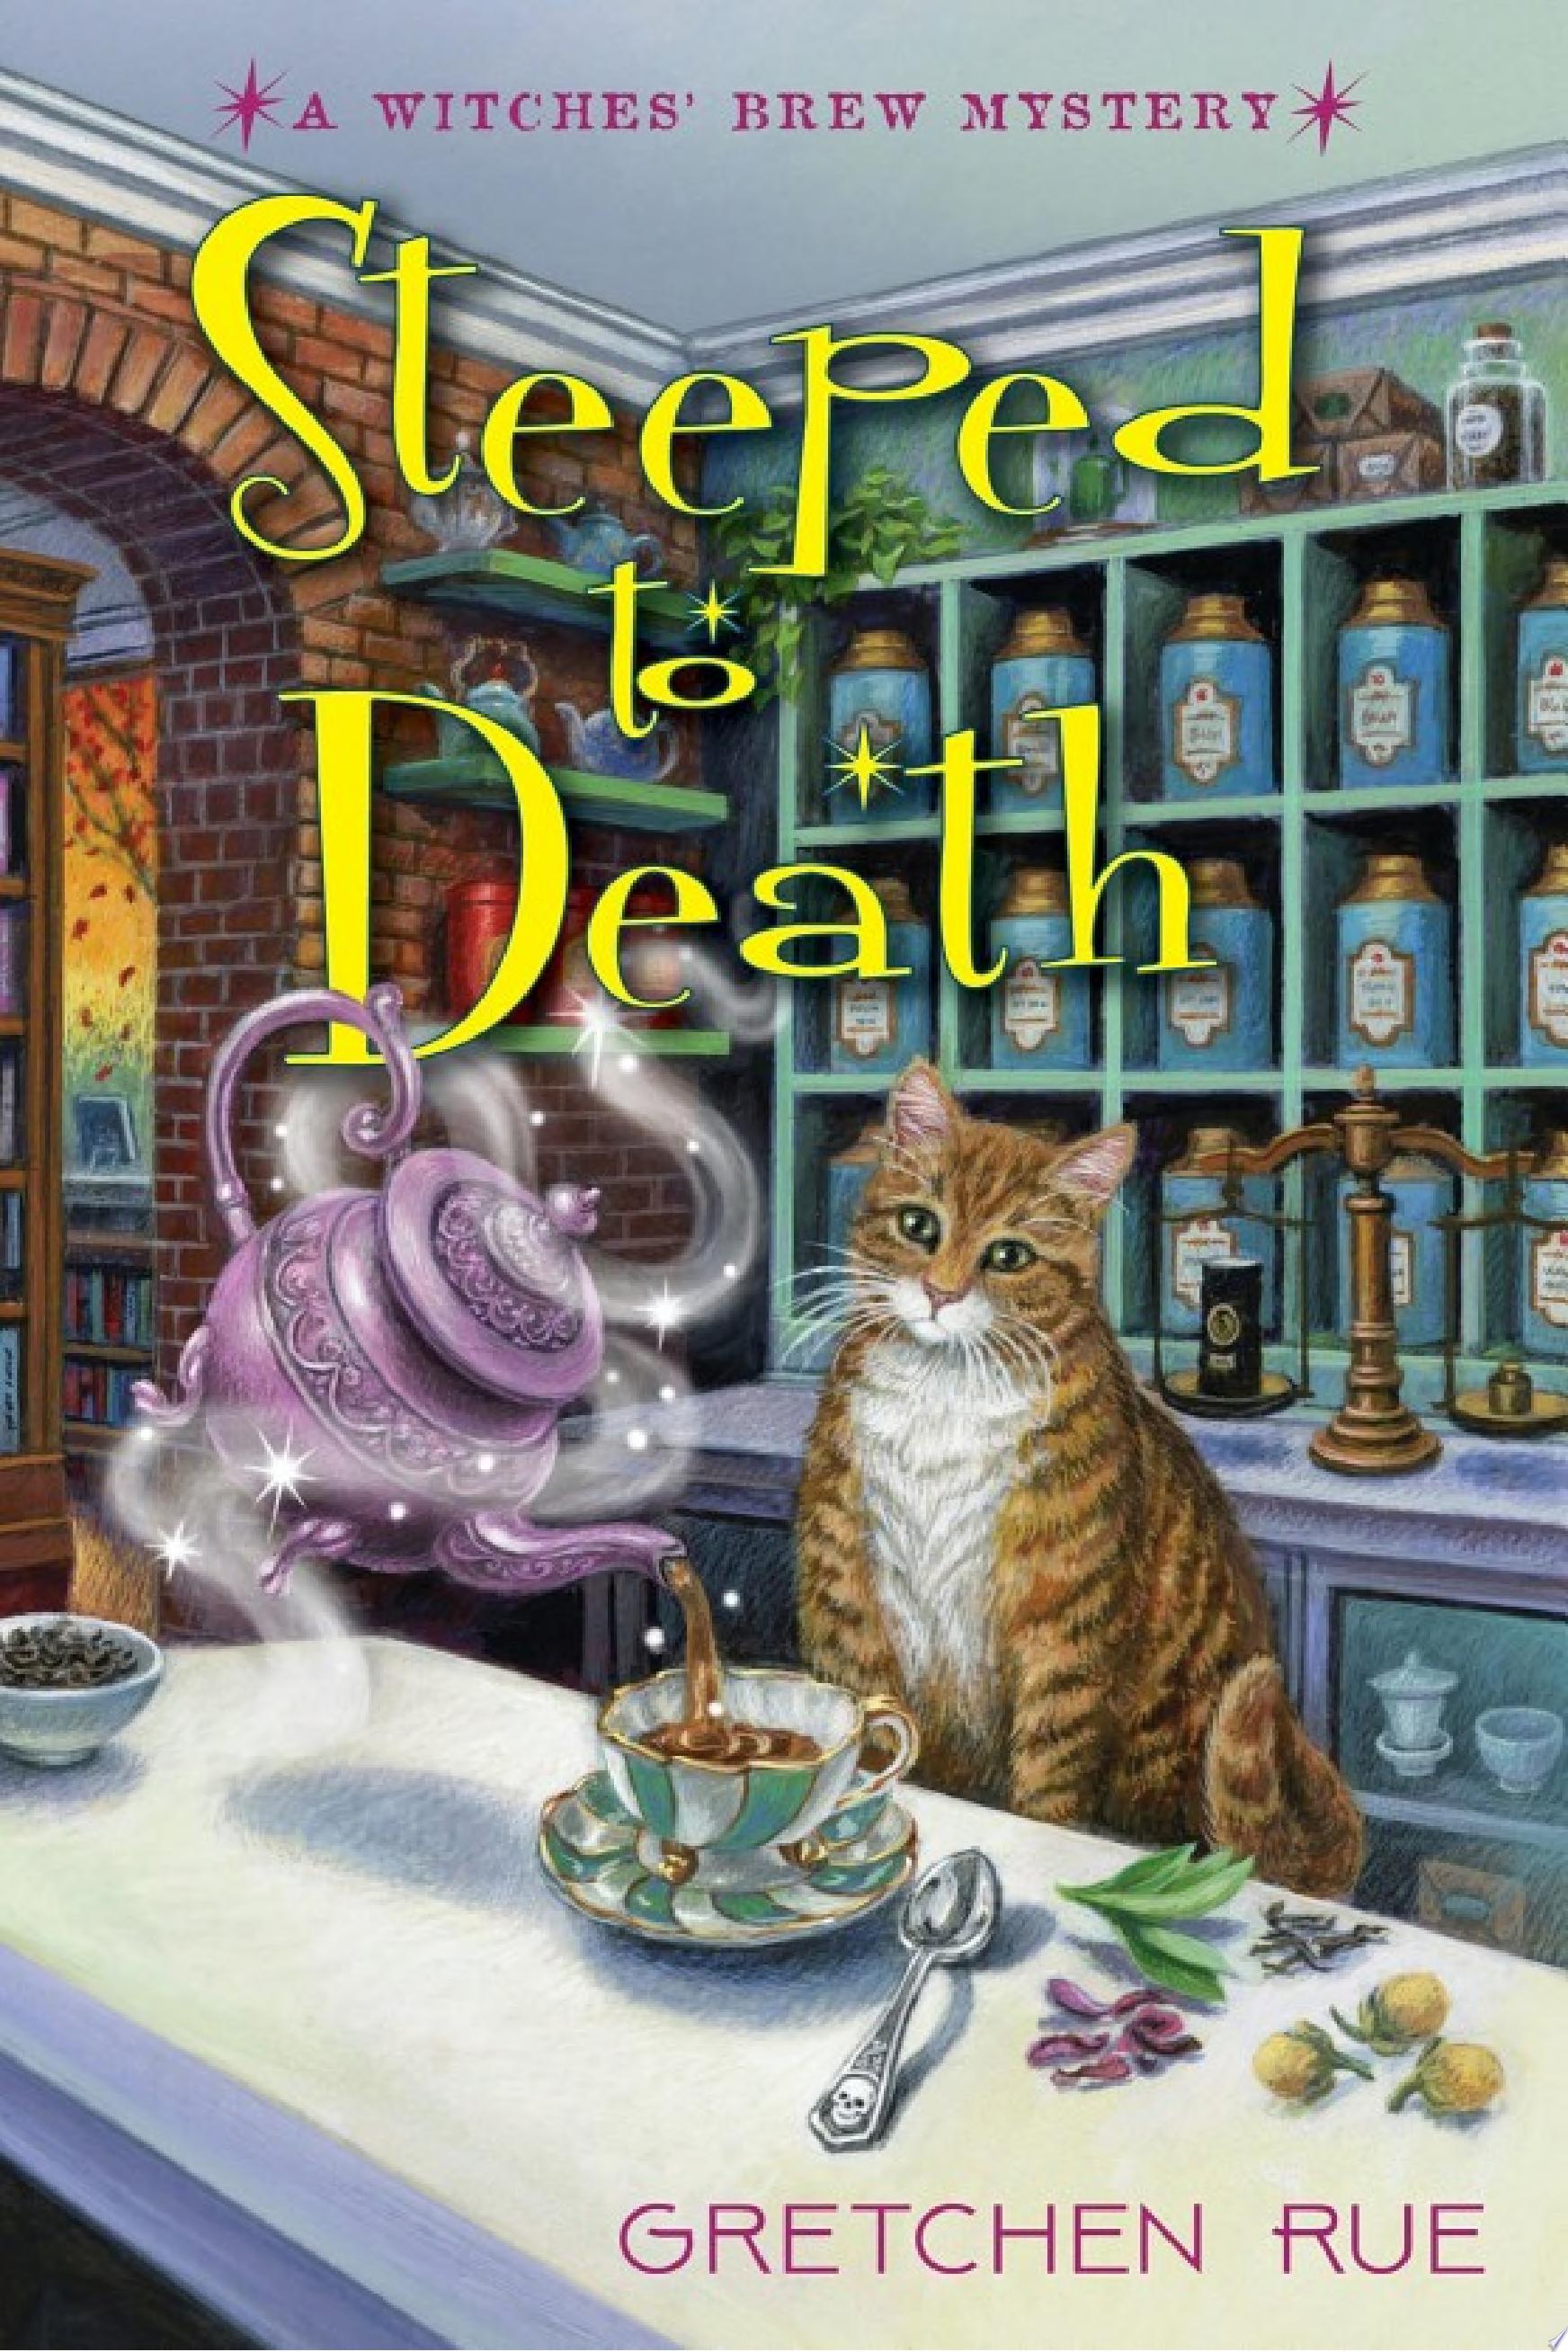 Image for "Steeped to Death"